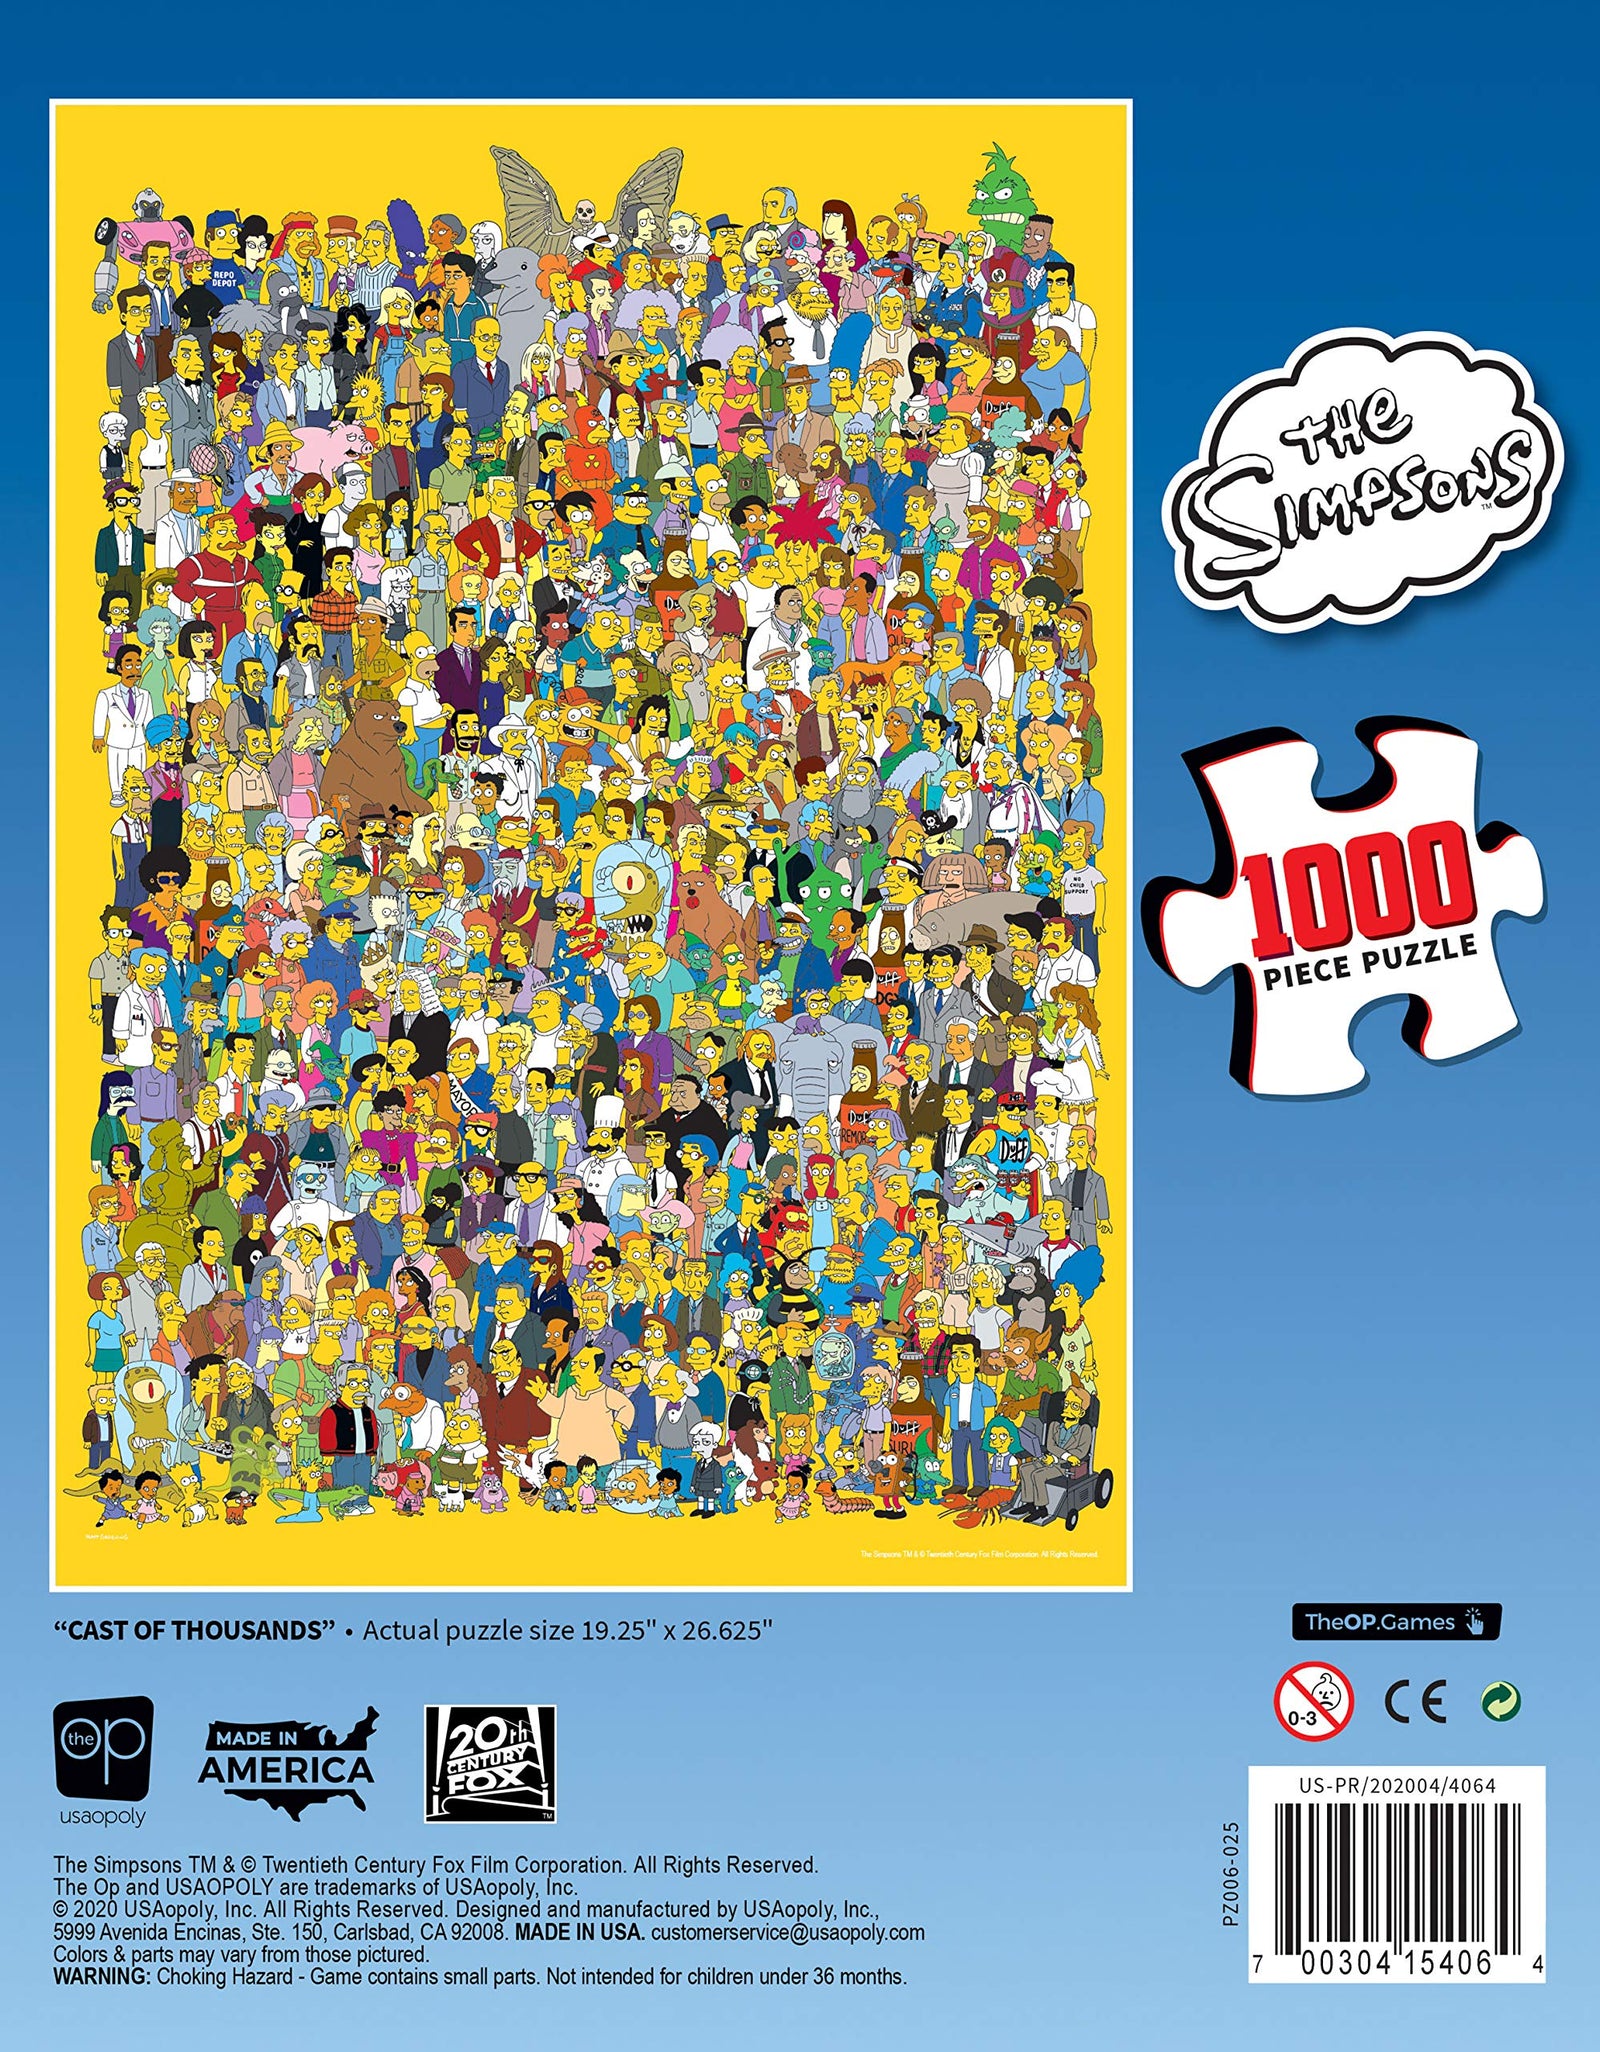 USAOPOLY The Simpsons Cast of Thousands 1000 Piece Jigsaw Puzzle | Officially Licensed Simpsons Merchandise | Collectible Puzzle Featuring Favorite Simpsons Characters from 20th Century Fox, Yellow